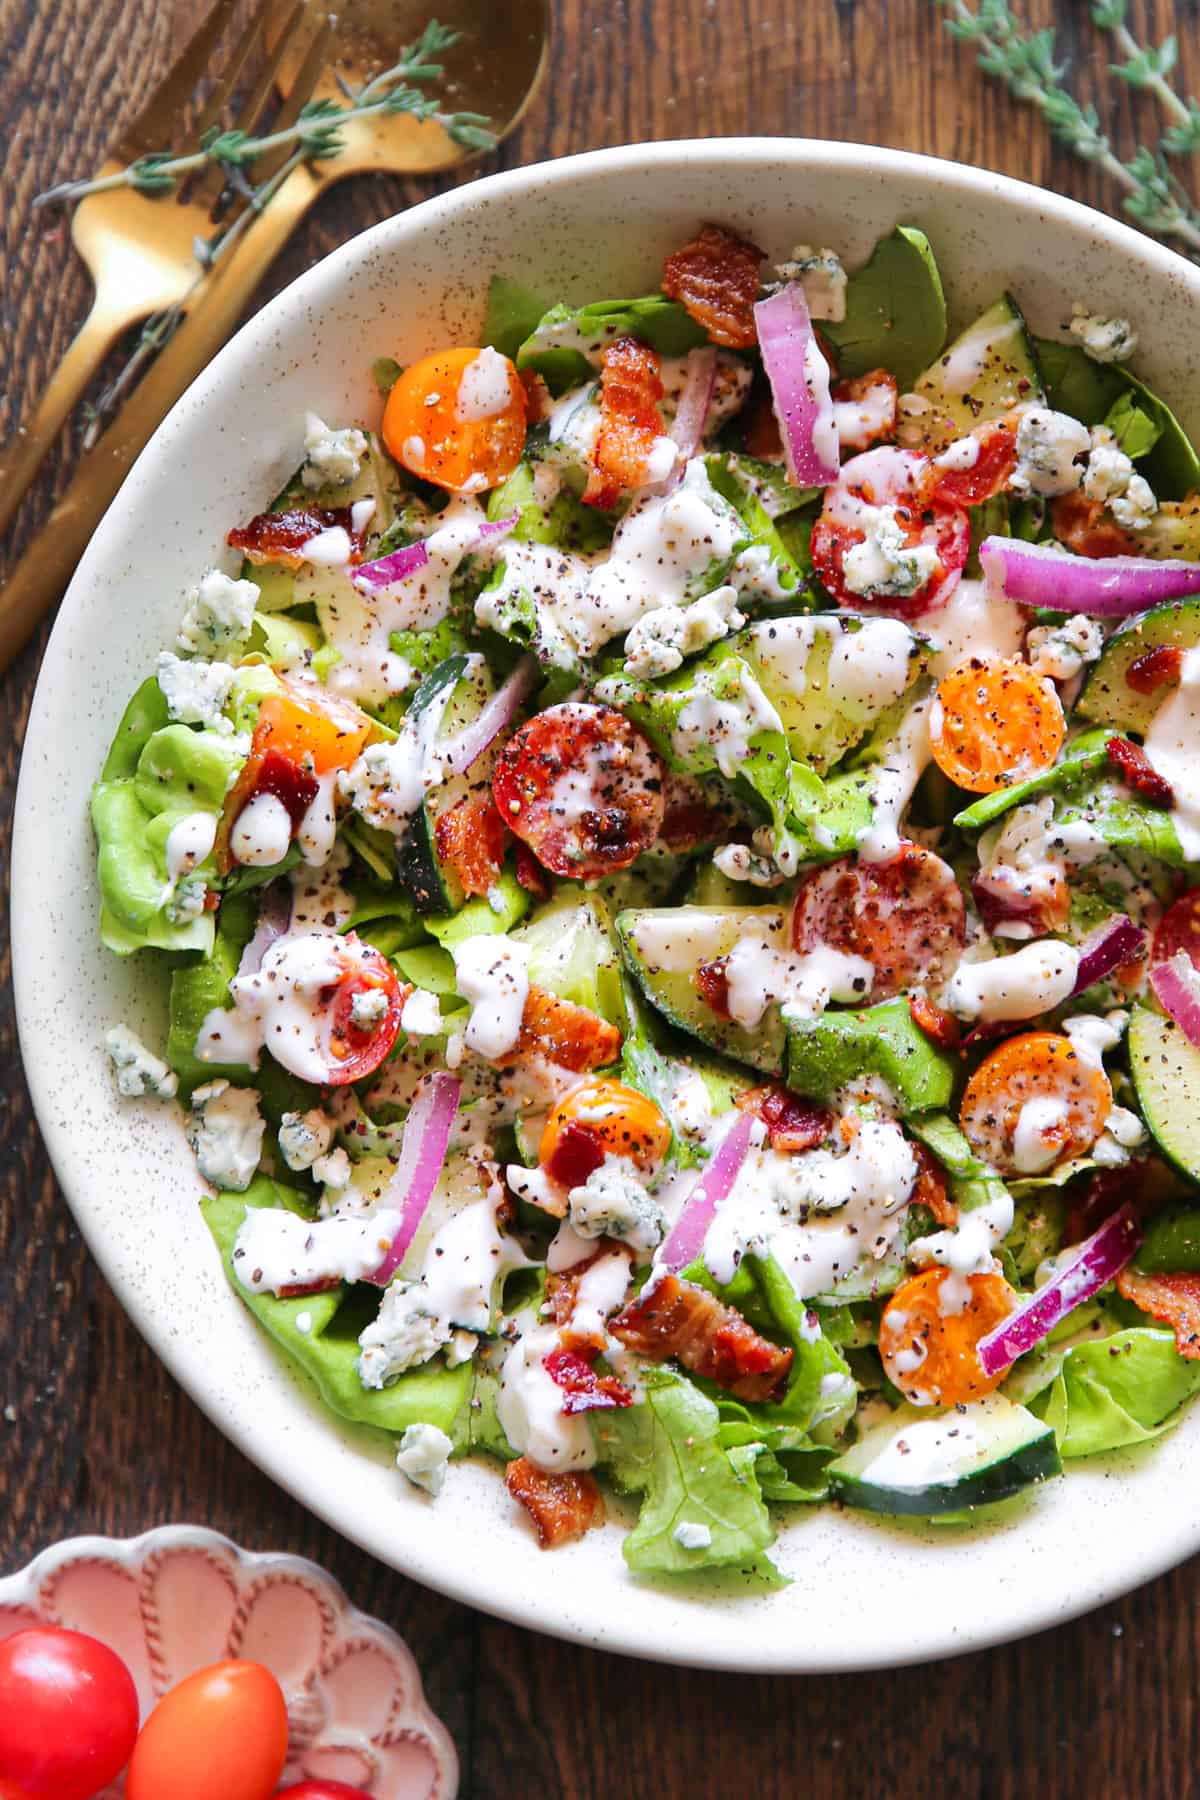 Tomato Cucumber Lettuce Salad with Bacon and homemade Blue Cheese Dressing - in a white bowl.